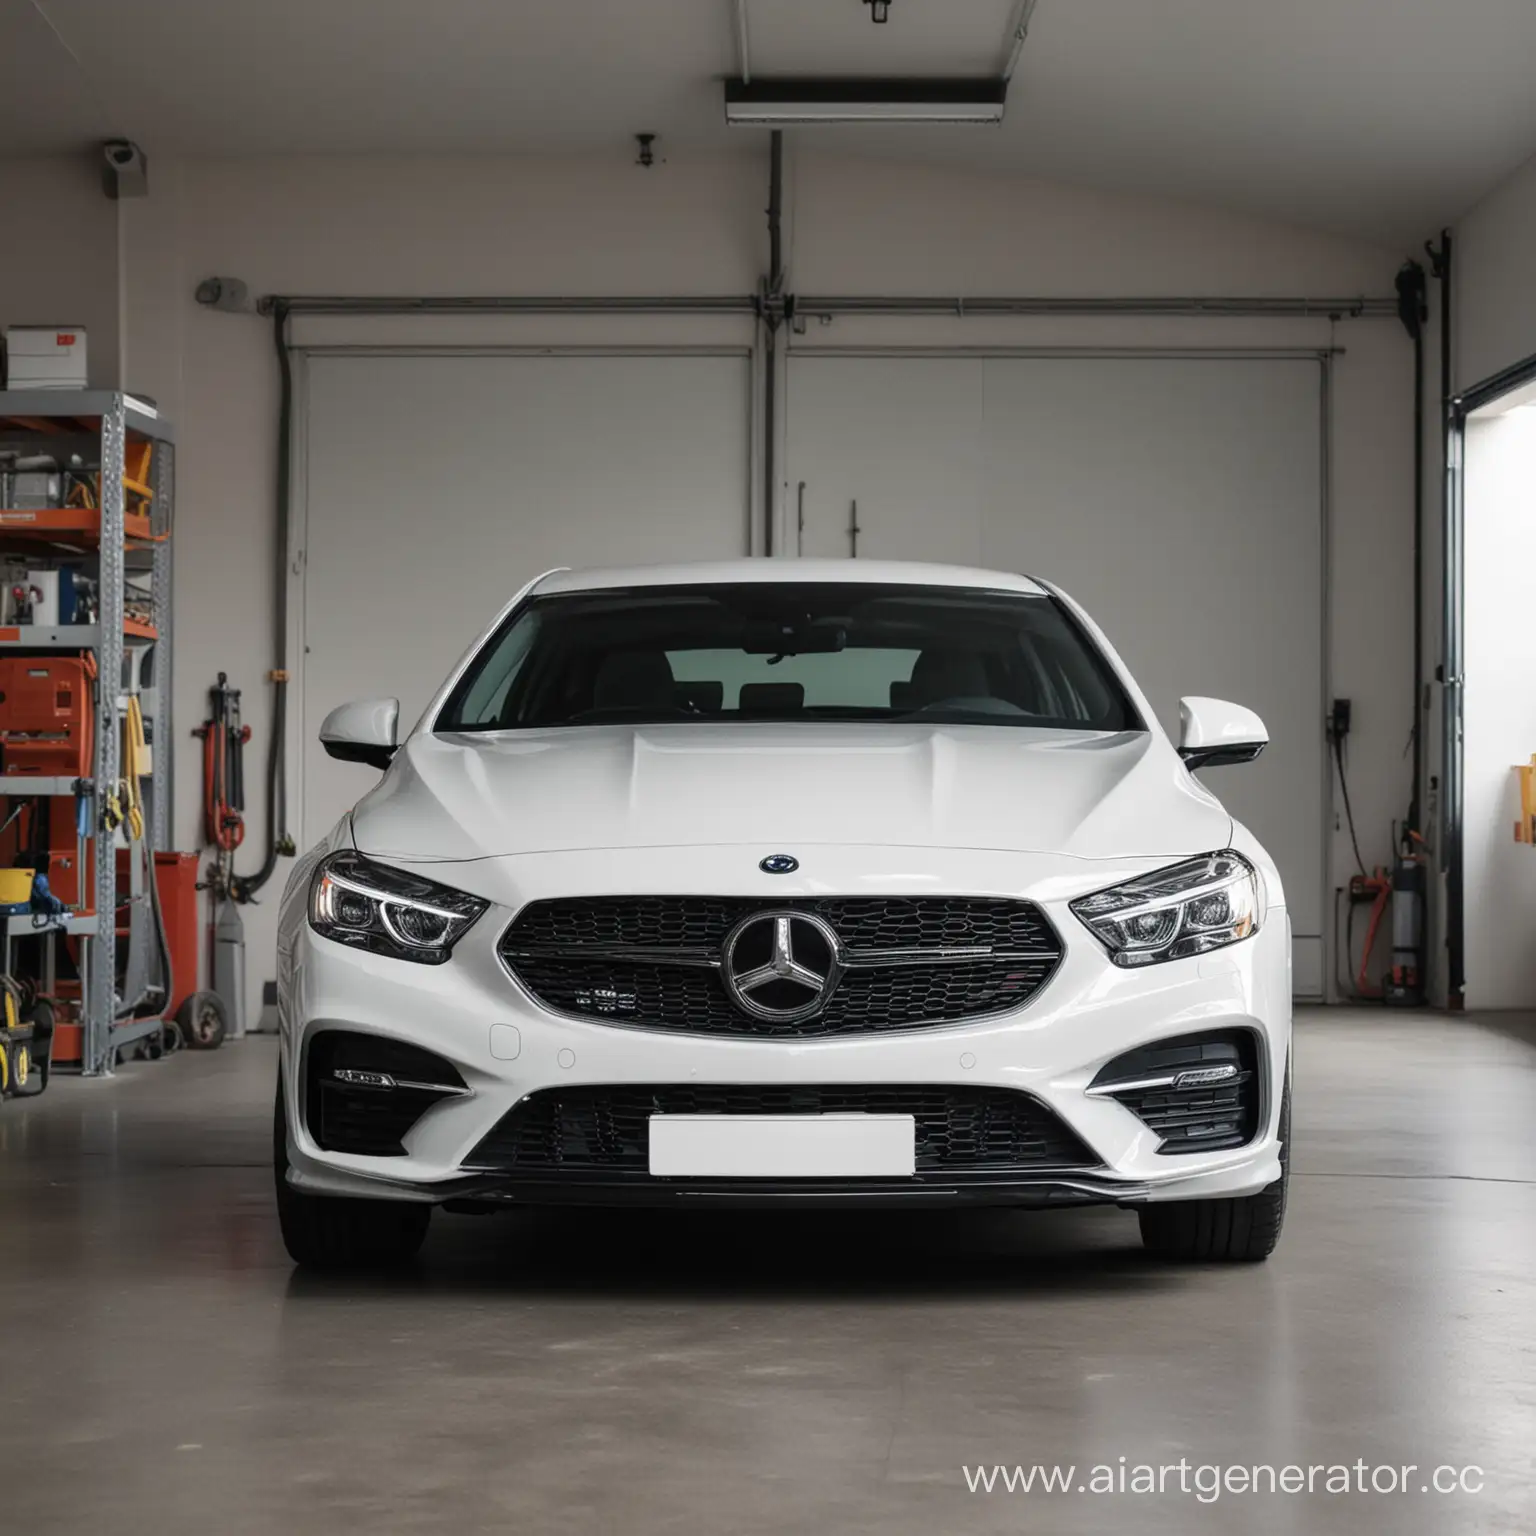 Brand-New-Car-Parked-in-Garage-Front-View